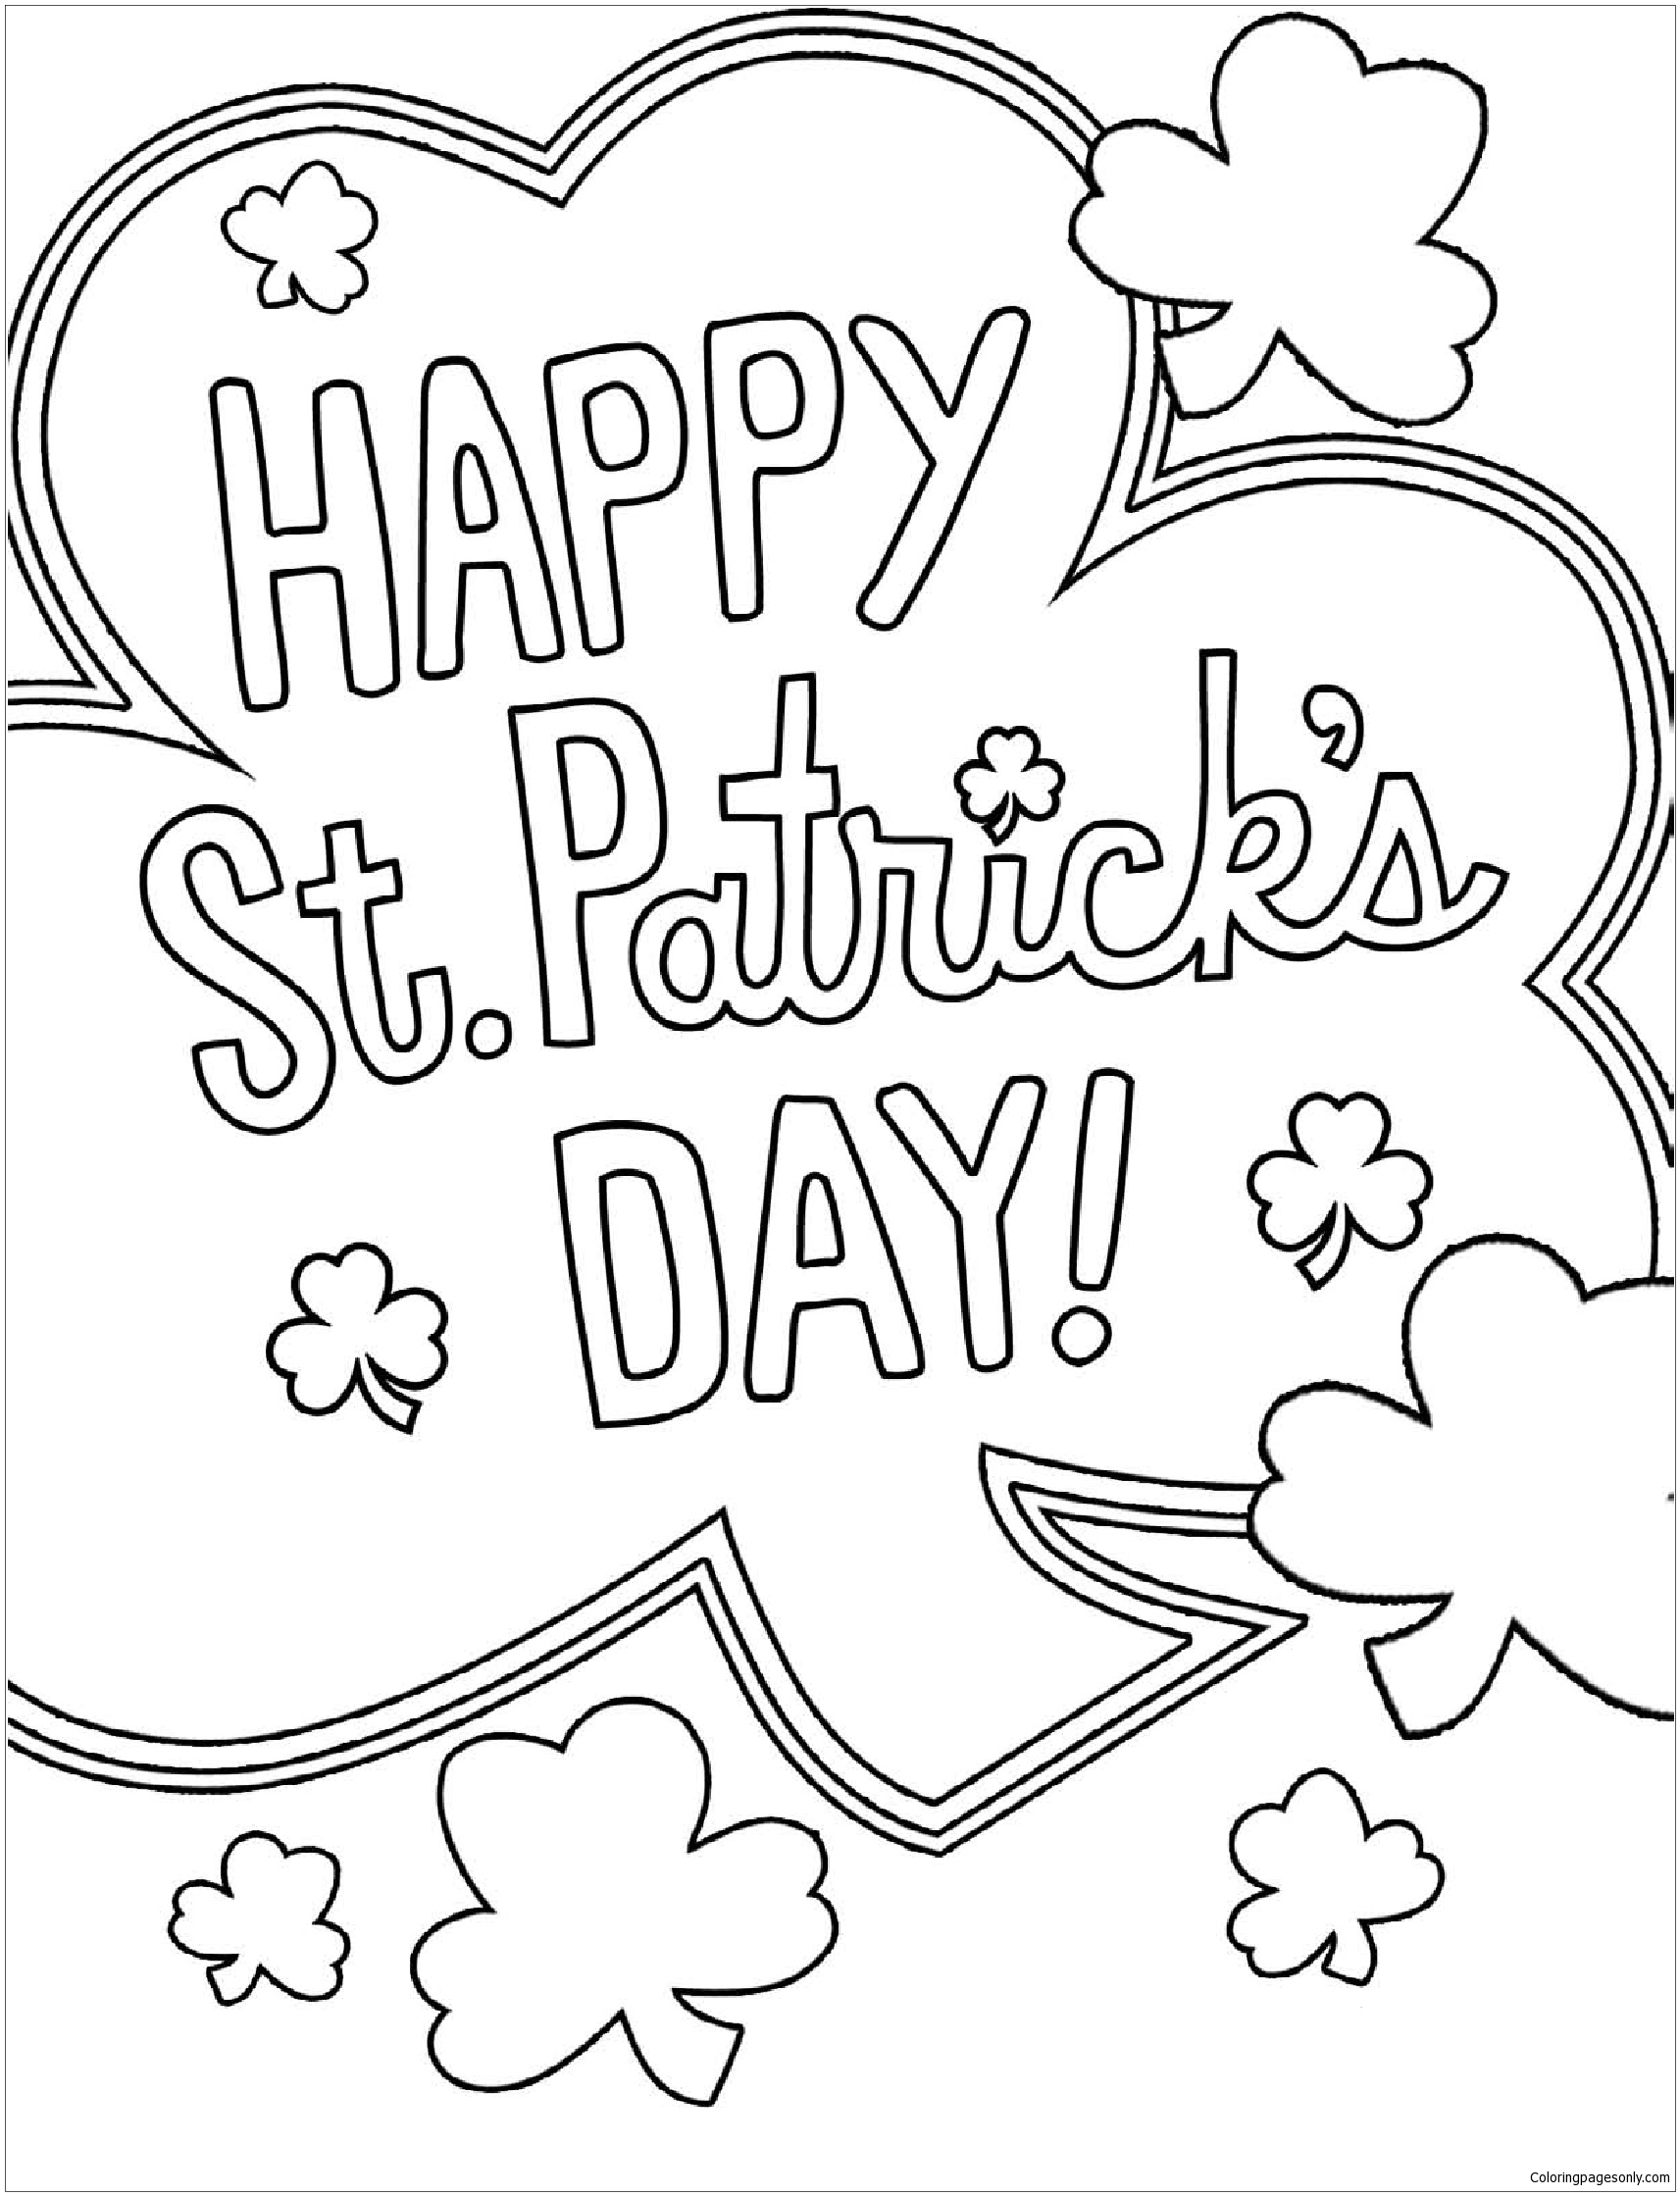 Free Printable St Patrick S Day Images